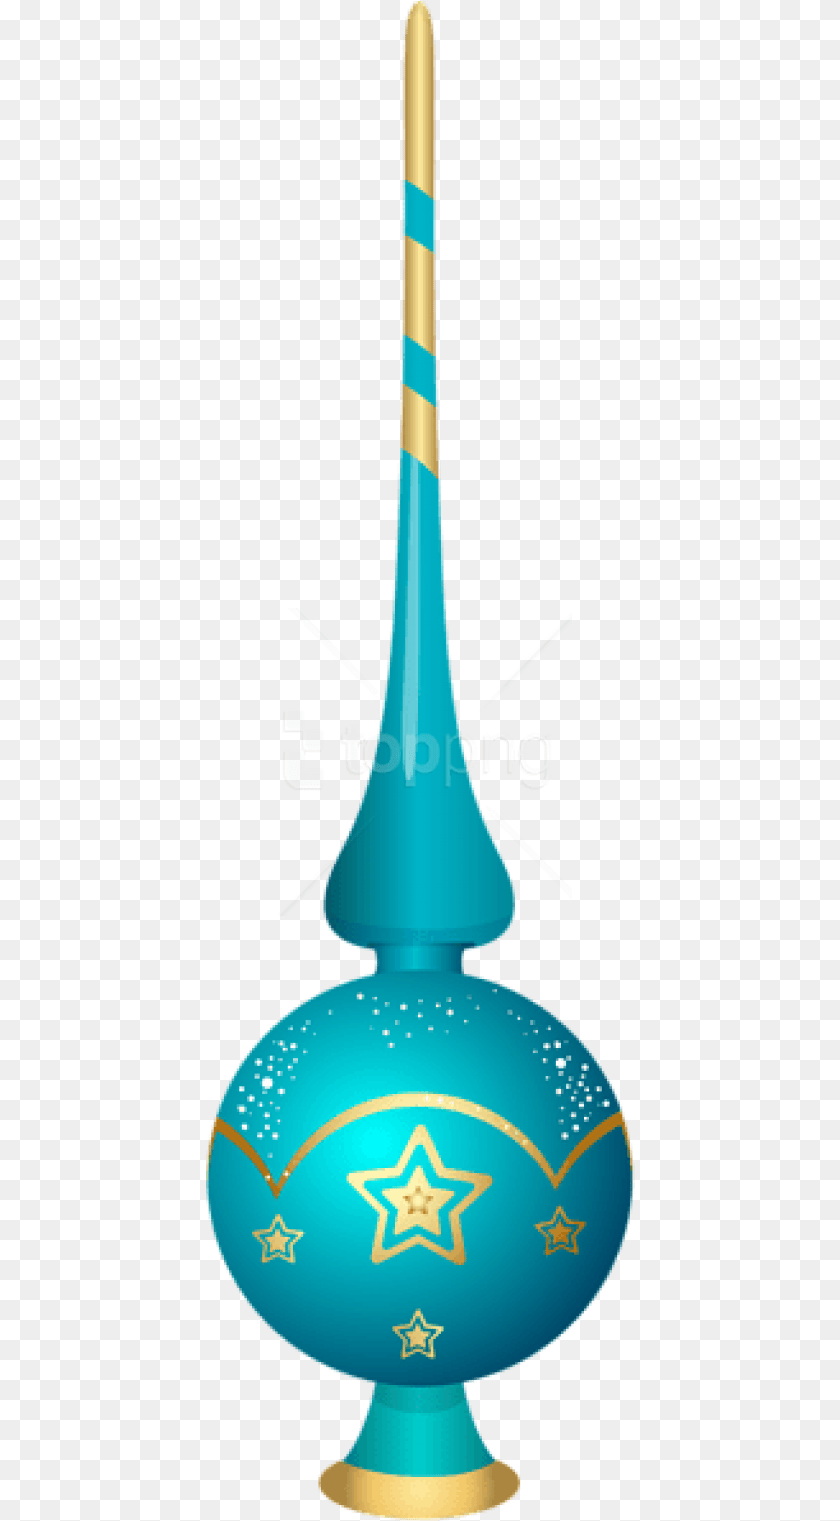 430x1521 Blue Christmas Tree Top Ornament Christmas Tree Top, Astronomy, Outer Space Clipart PNG